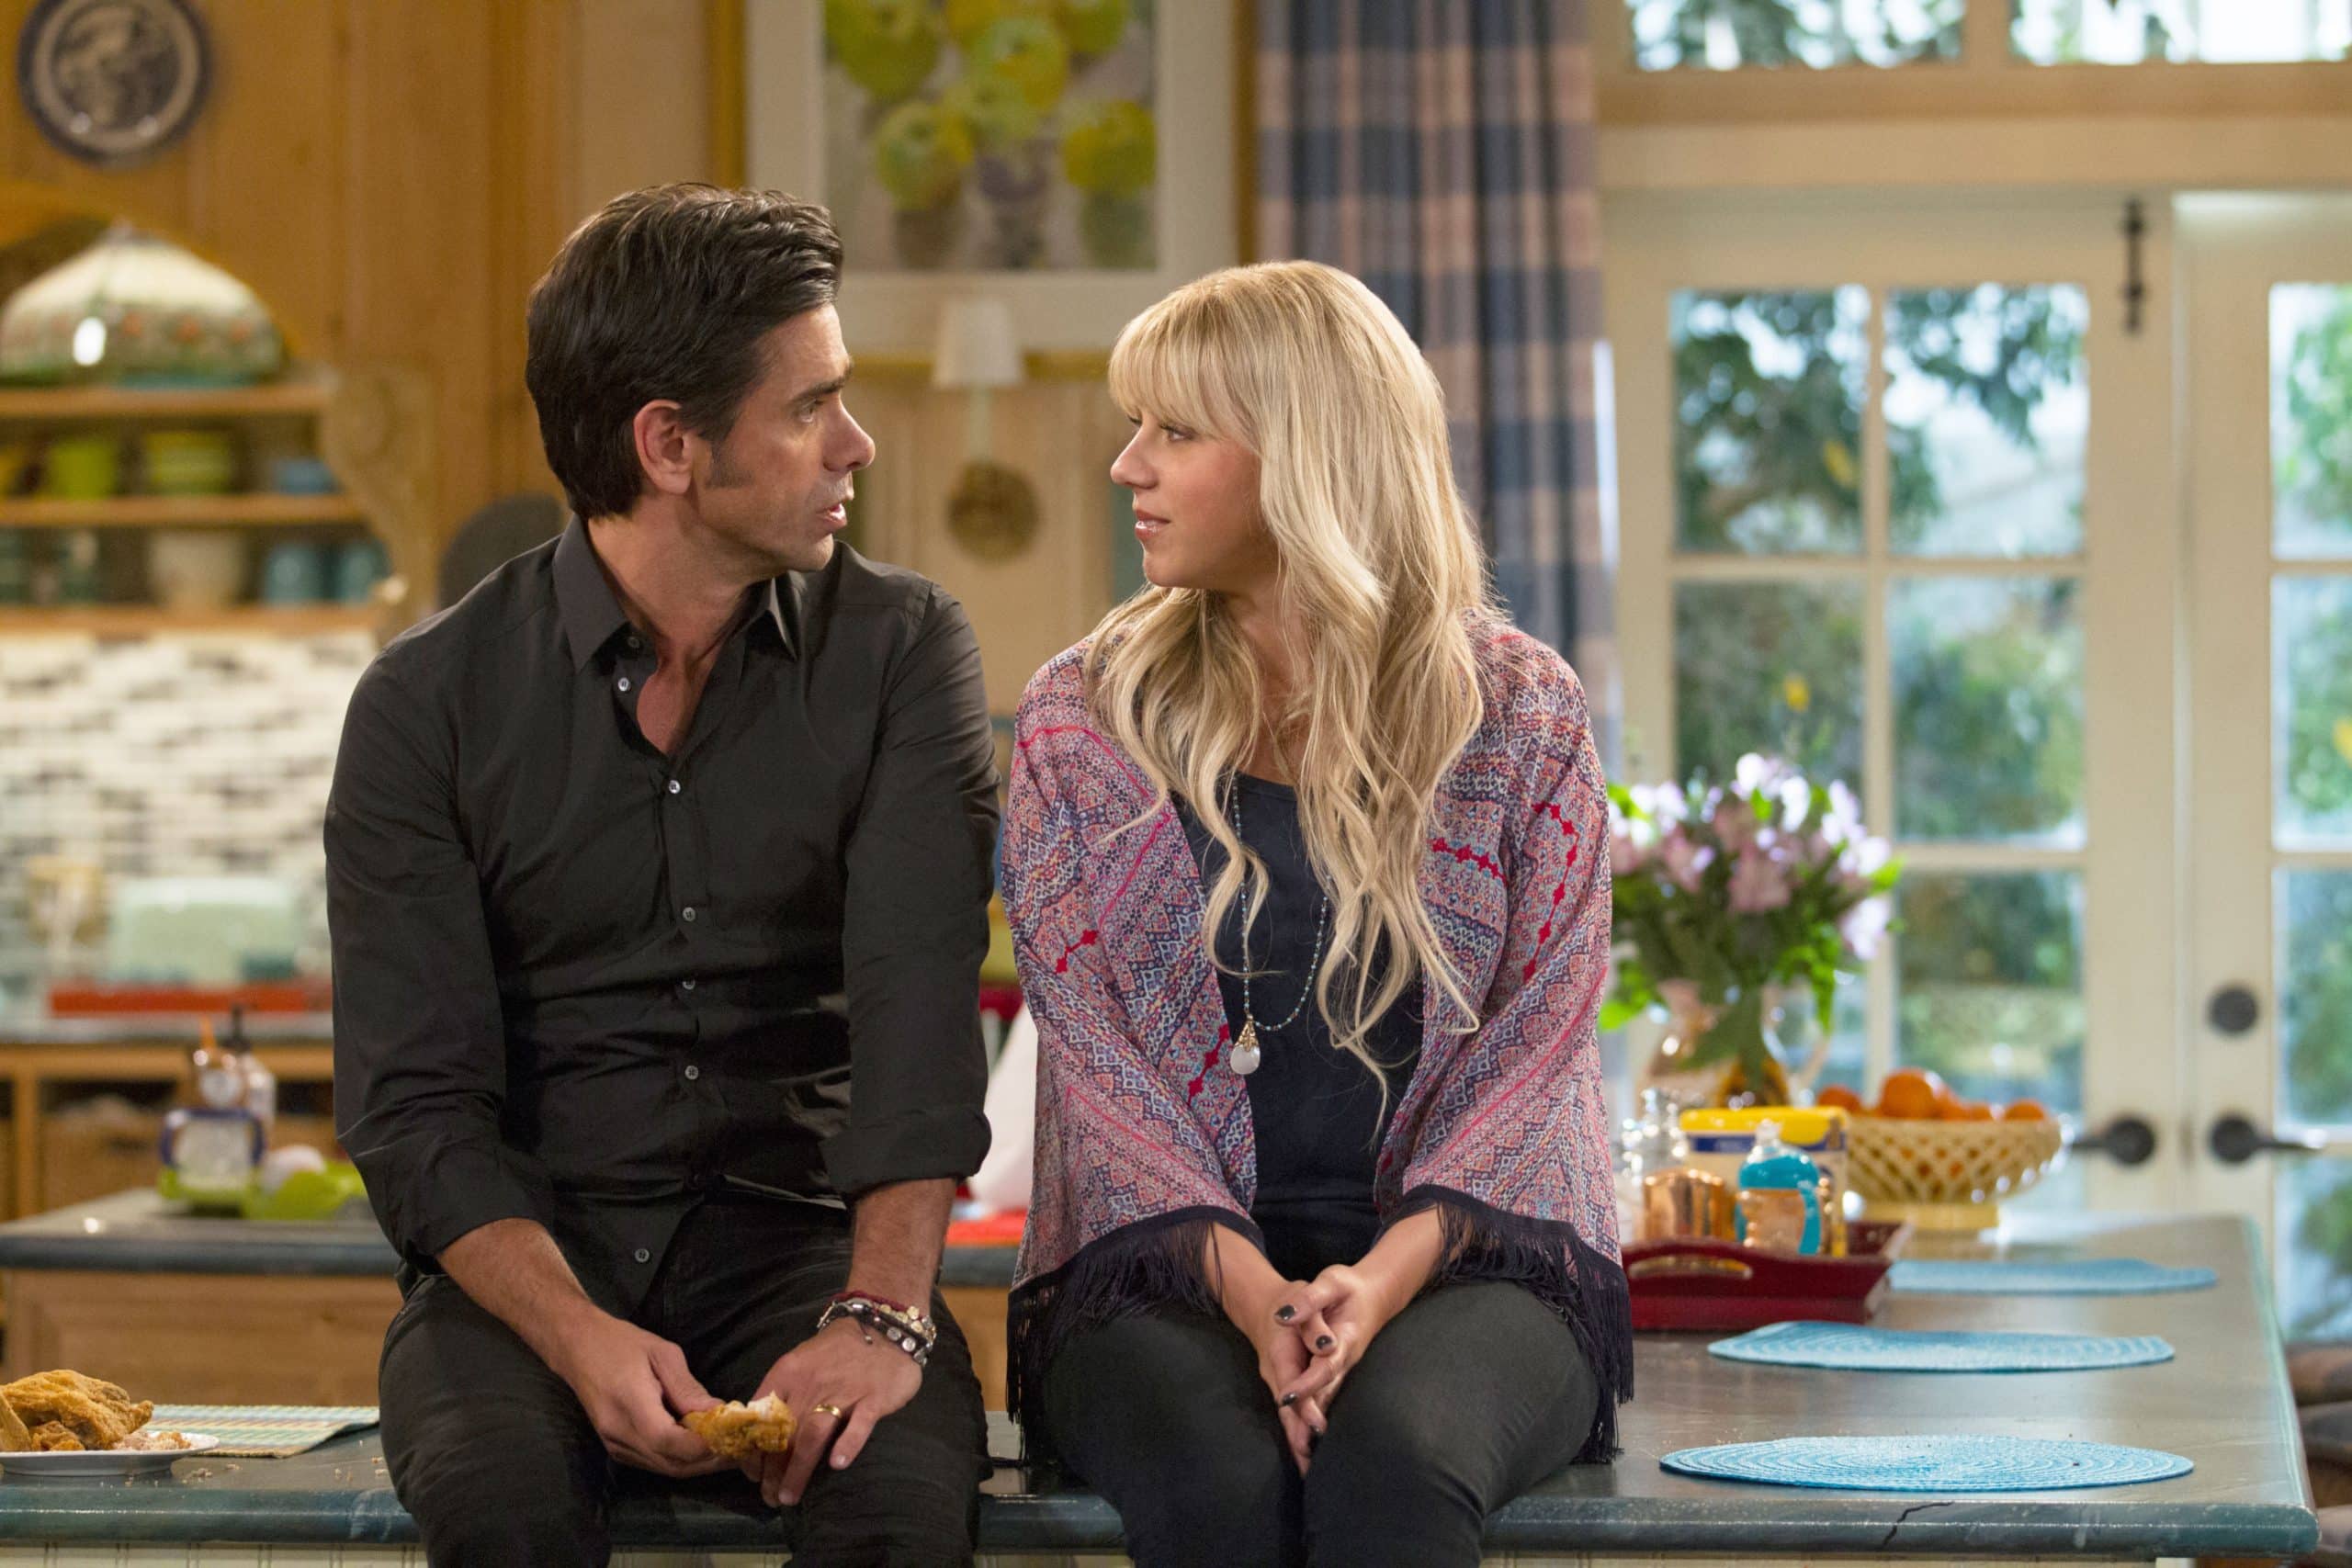 FULLER HOUSE, l-r: John Stamos, Jodie Sweetin in 'Moving Day'